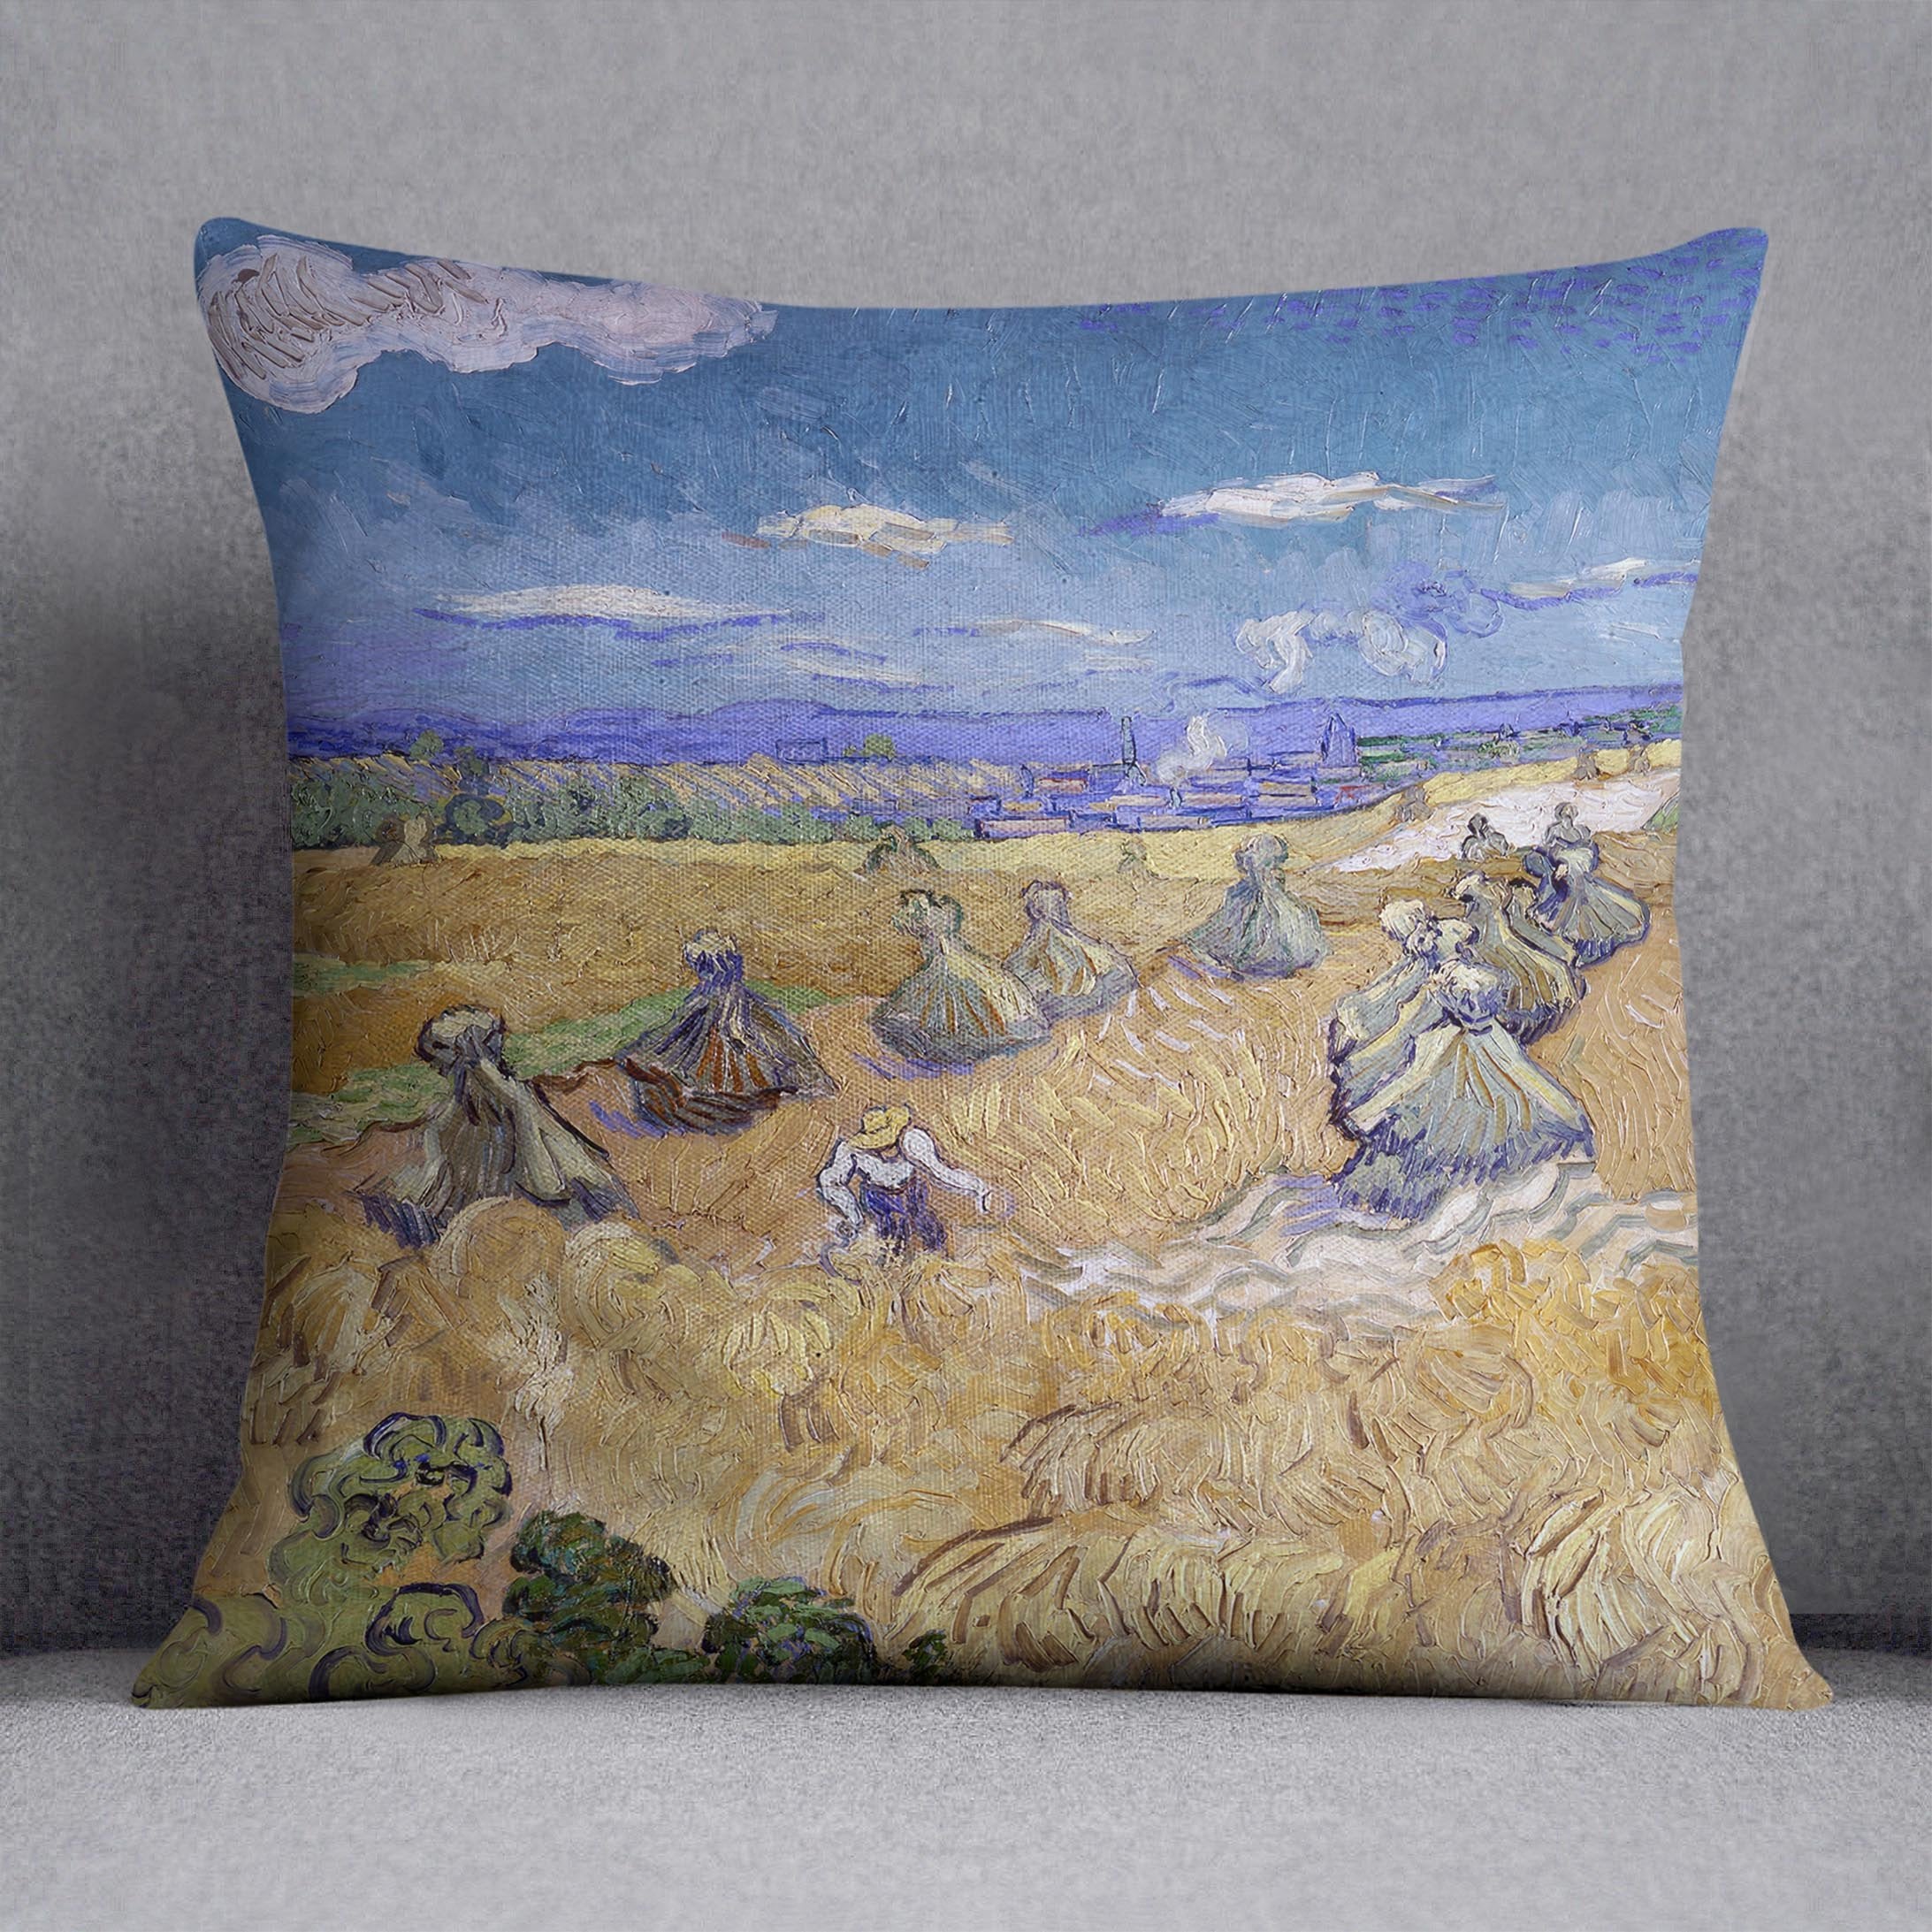 Van Gogh Wheat Fields with Reaper at Auvers Throw Pillow